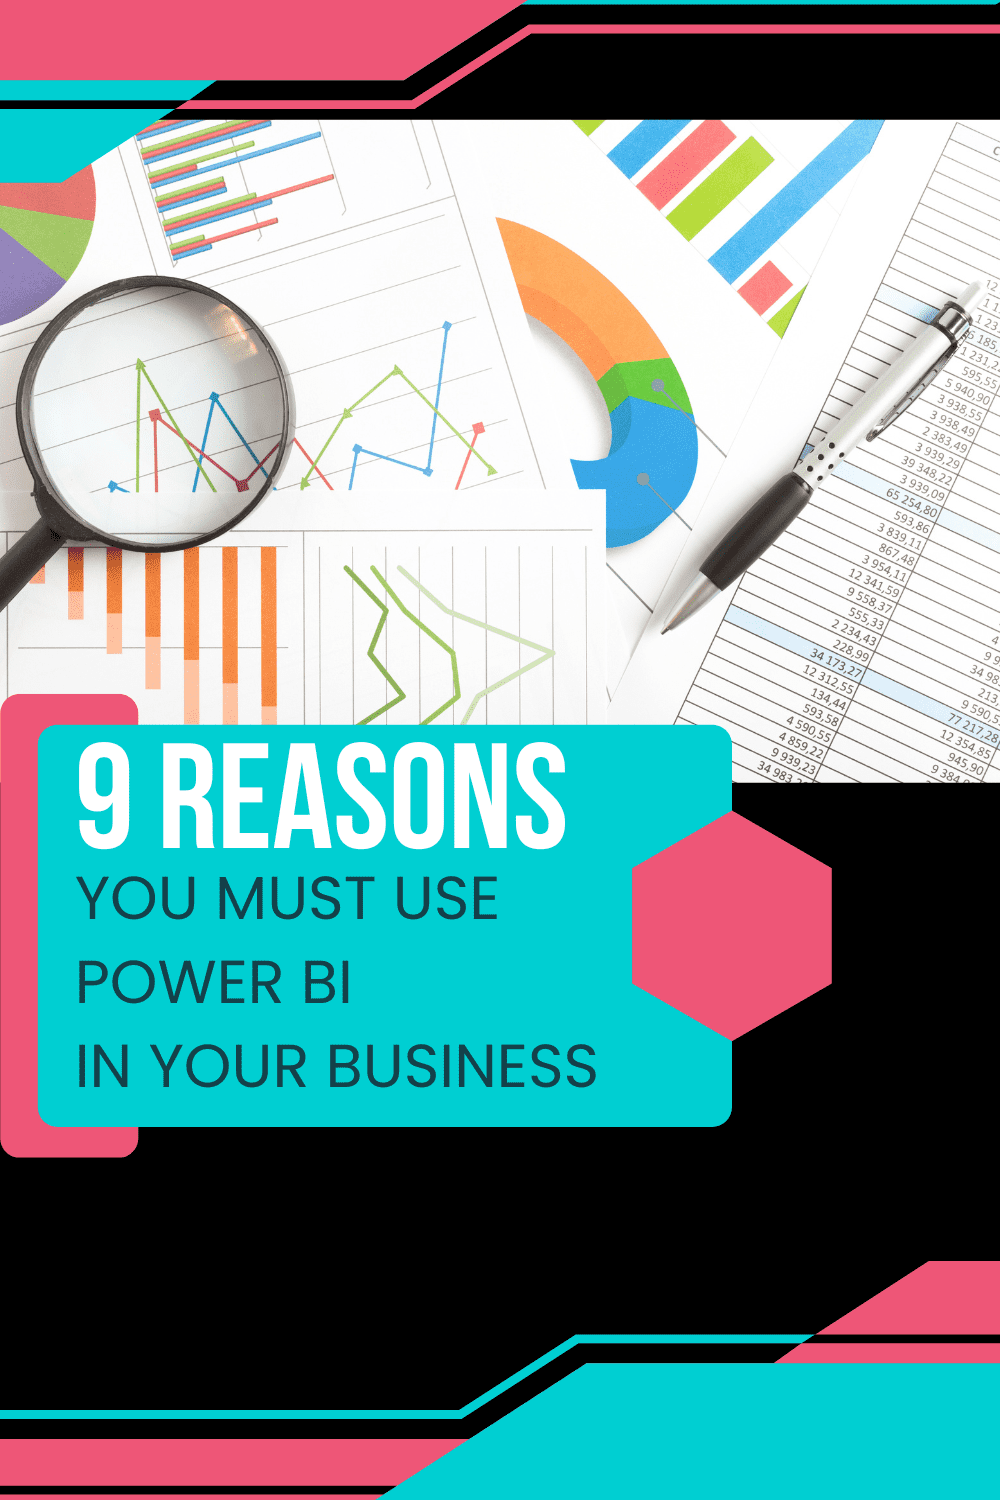 9 Reasons You Must Use Power BI In Your Business